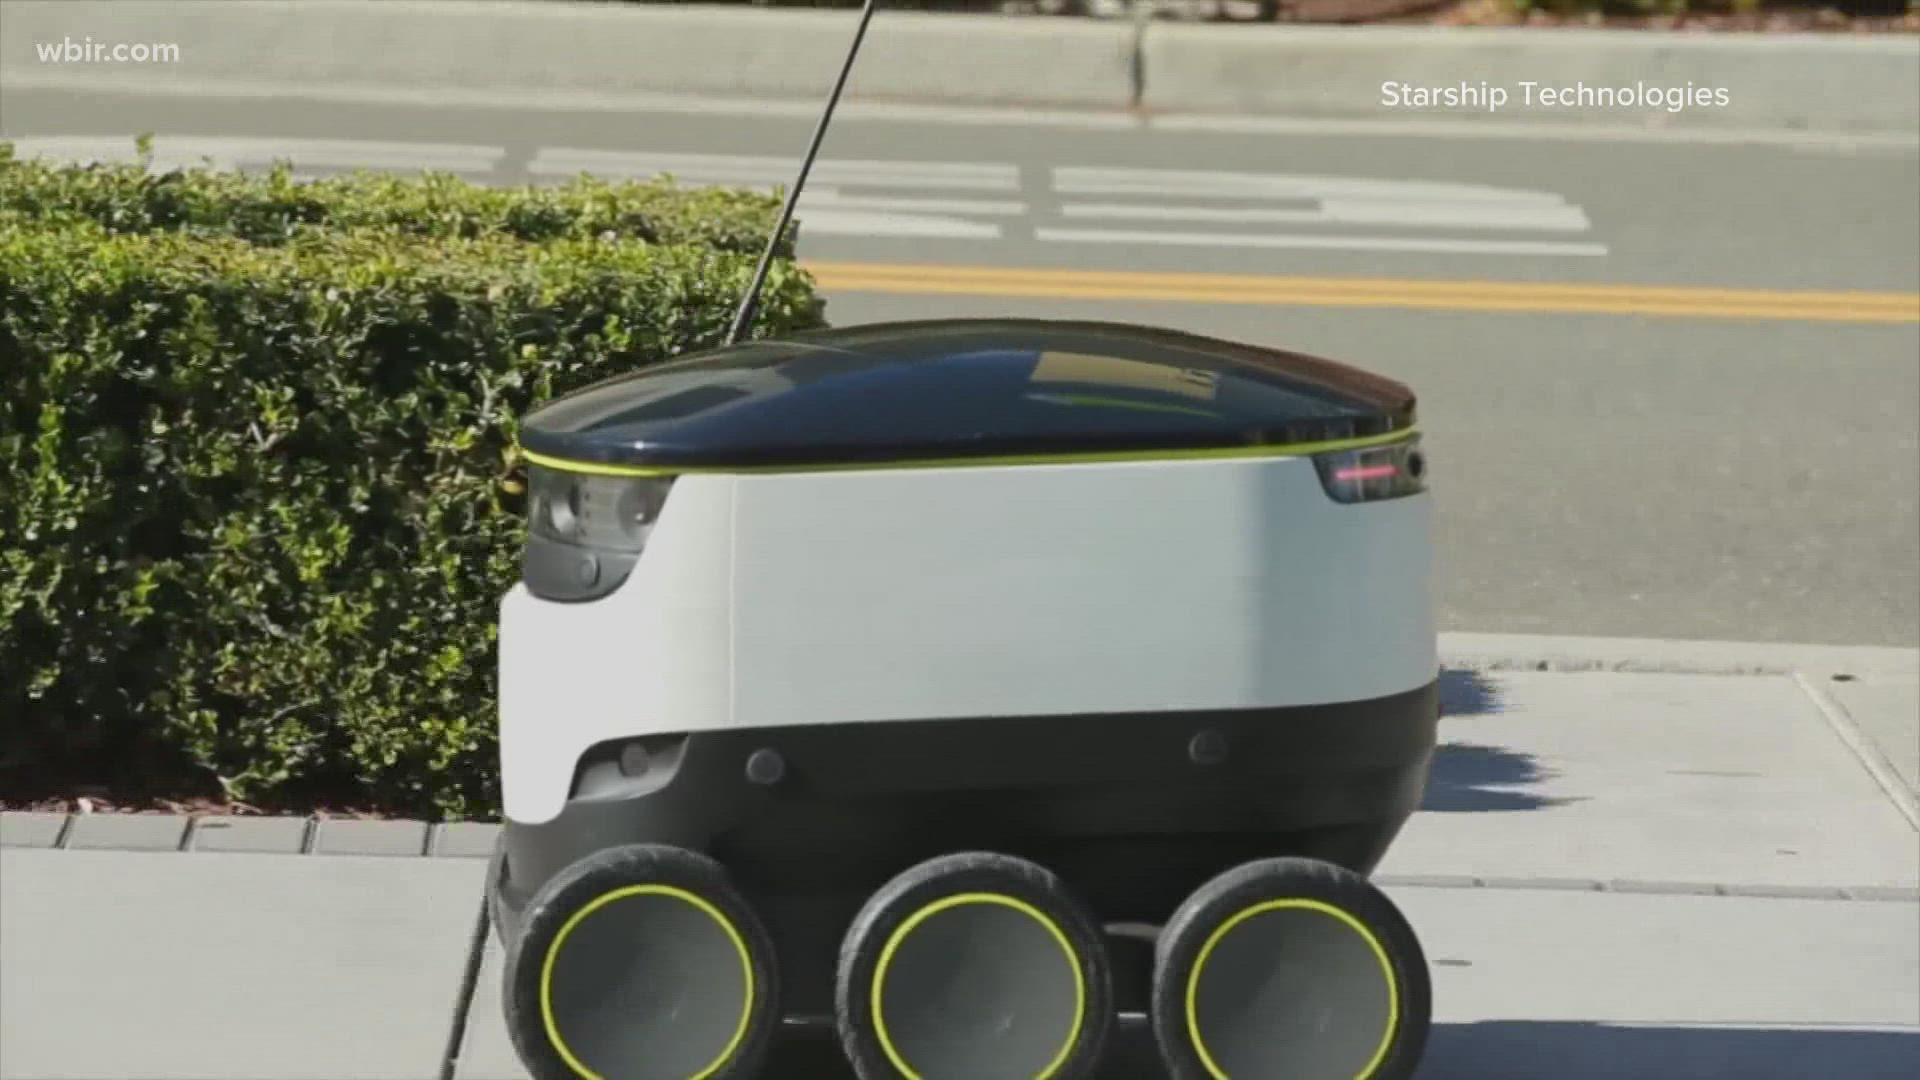 Restaurant Delivery Robot is Here to Serve